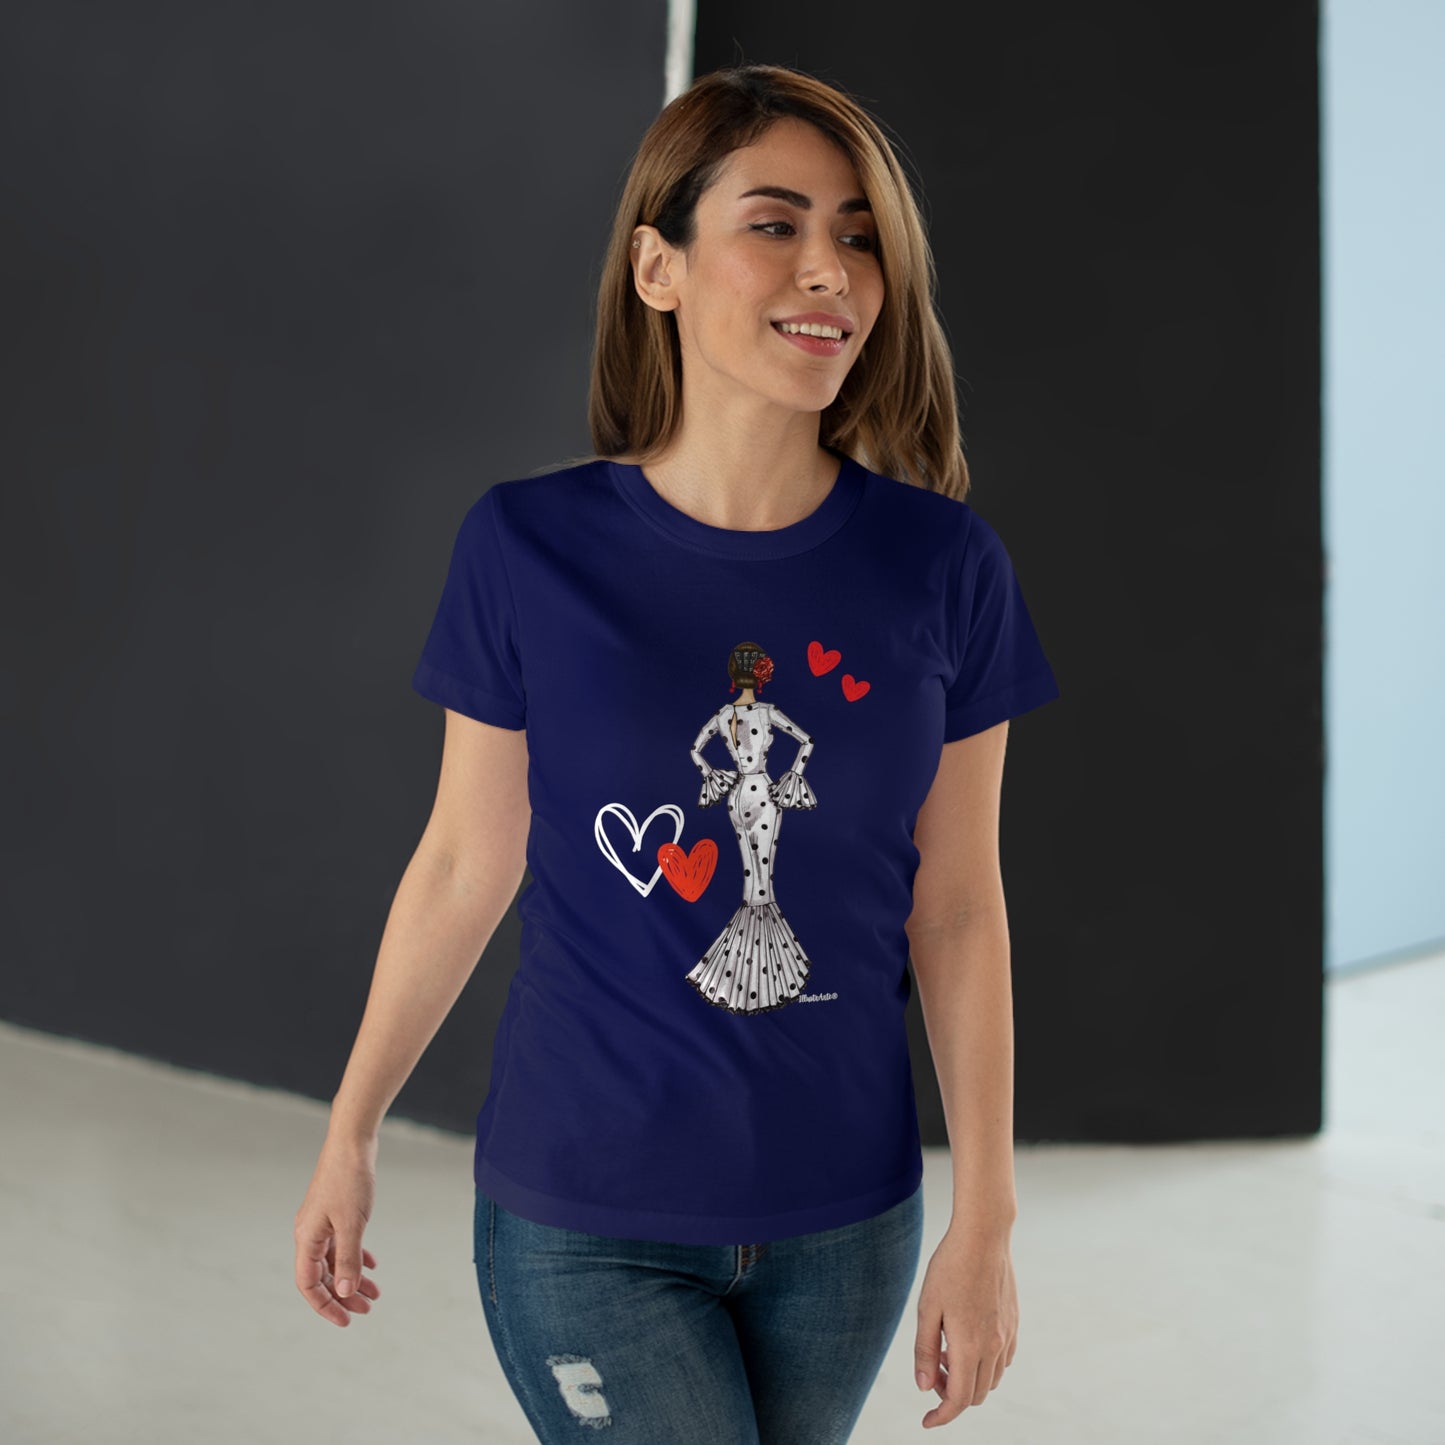 a woman wearing a blue t - shirt with a heart on it